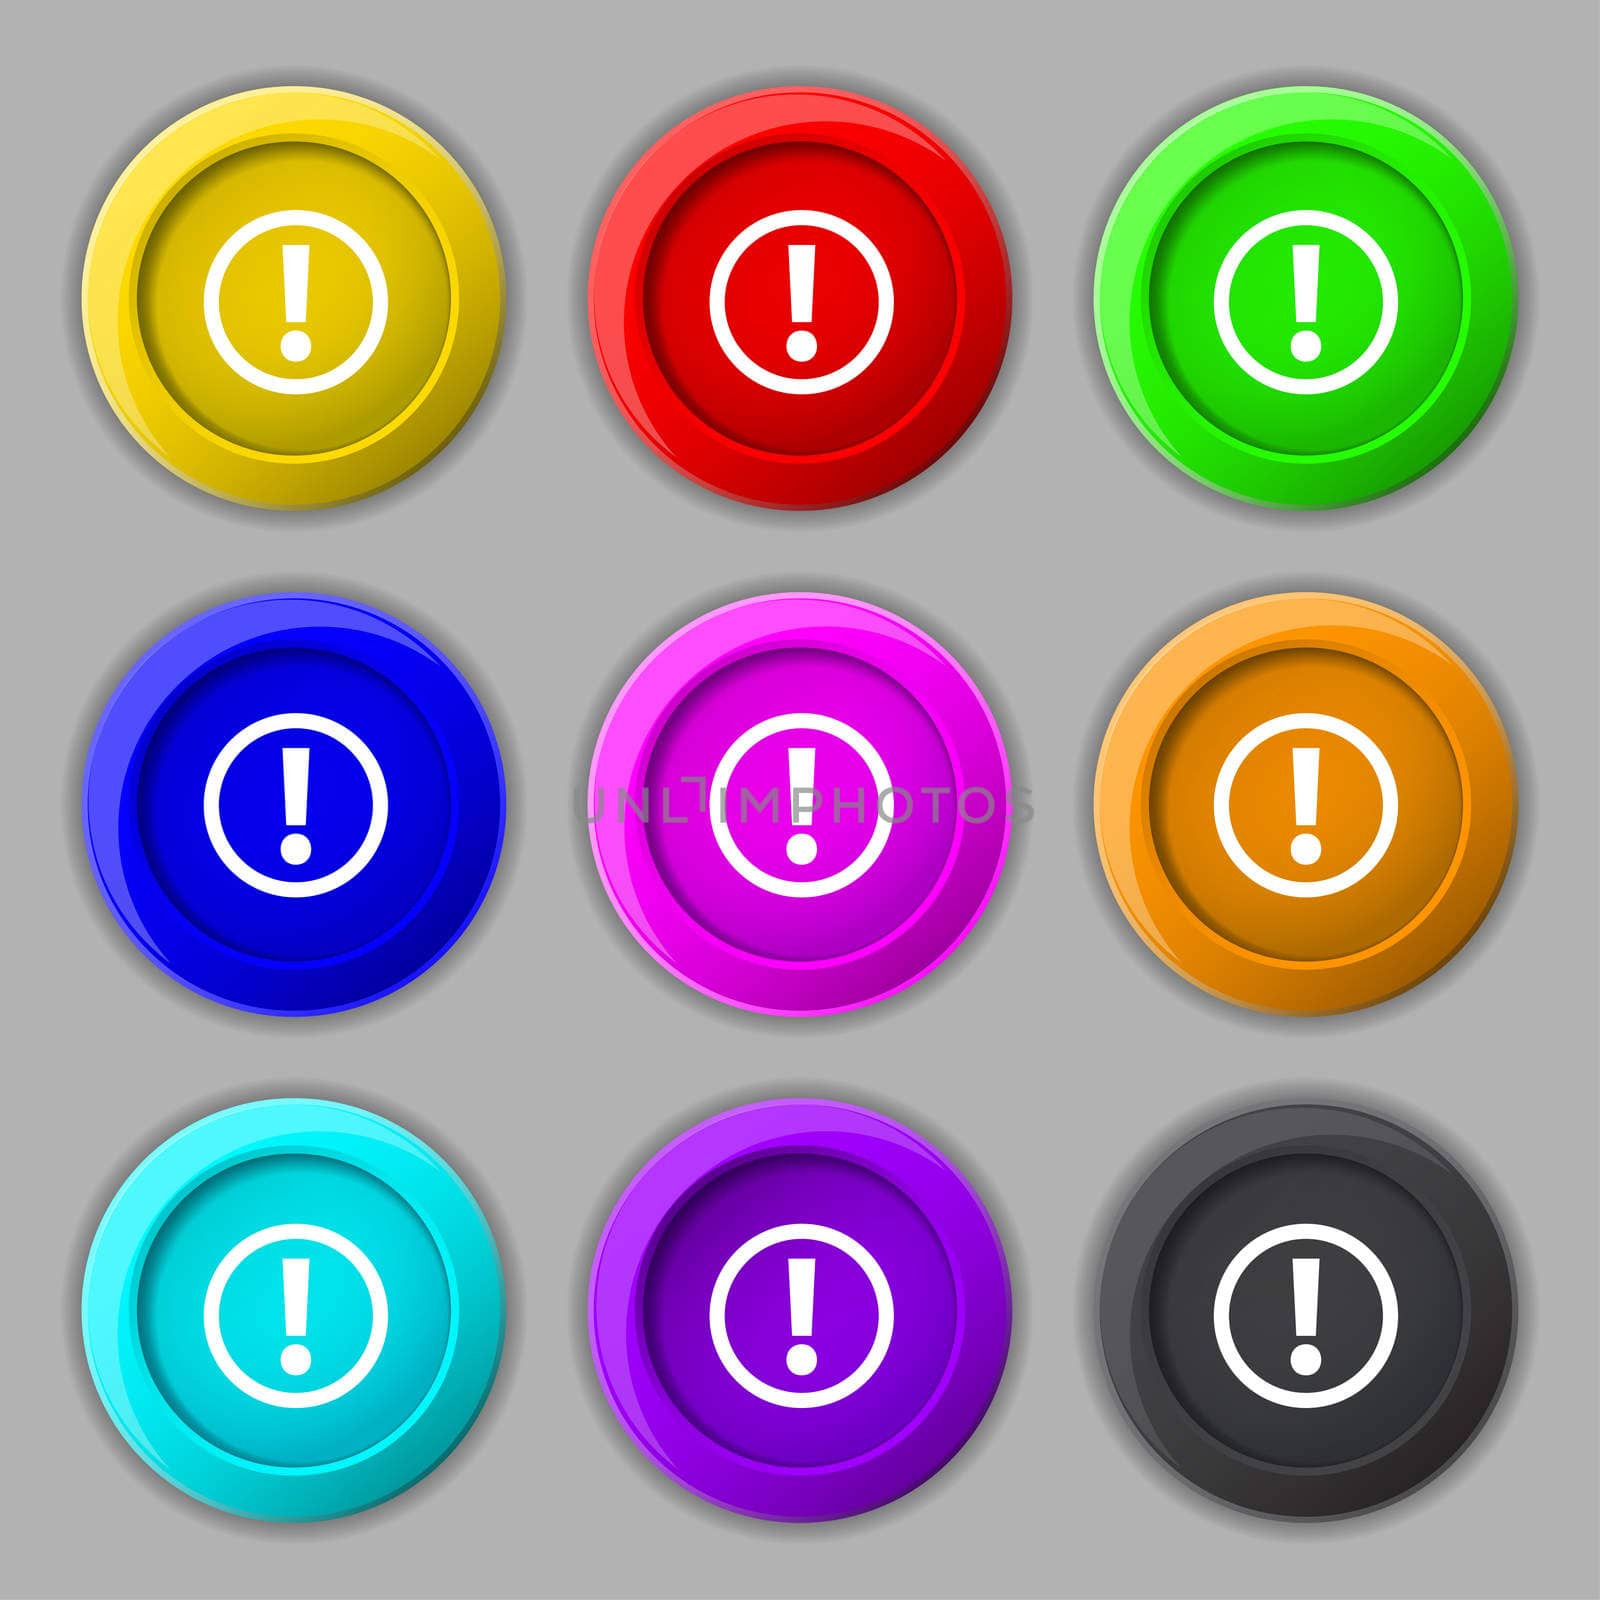 Attention sign icon. Exclamation mark. Hazard warning symbol. Set colour buttons illustration